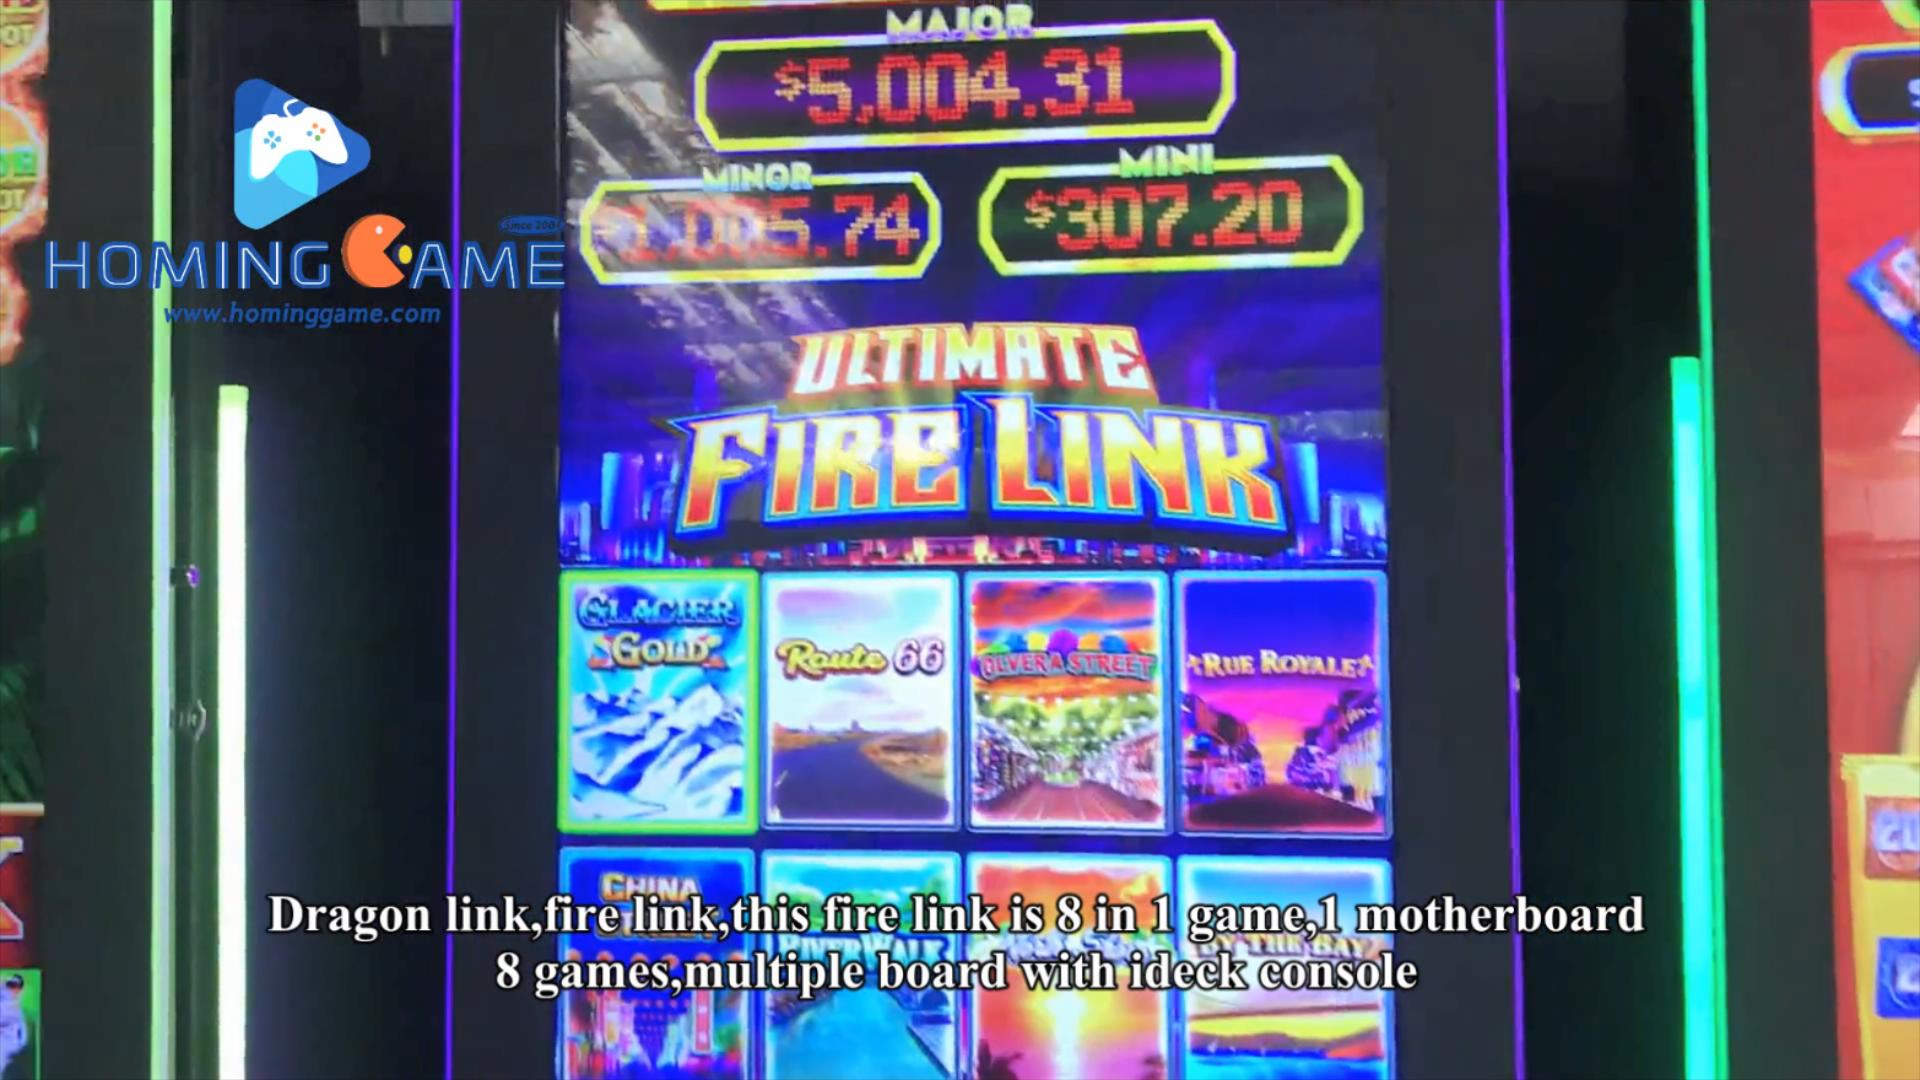 2021 Specialize in Manufacturing 43' Touch Fire Link slot game,Buffalo Gold slot game,fusion 4 slot game,Money Gold,Dragon Link,Panda link,golden master,high roller slot game,lighting slot game by HomingGame(Order Call Whatsapp:+8618688409495)<br /><br />
</span> </p><br />
<p style='text-align:center;'><br />
	<span style='font-size:24px;font-family:' times='' new='' roman';'=''><img src='https://source.gametube.hk/image/kindeditor/20210507/20210507115933_86285.jpg' alt='2021 USA Best Slot Table Game Machine Manufactuer By HomingGame Producing All kind of Slot Table,Fire link,Dragon link,Fusion 4,golden master,money gold,lighting ,panda link slot table game machine (Order Call Whatsapp:+8618688409495),43' touch curve monitor 8 in 1 fire link slot table game machine,8 in 1 fire link slot game machine,slot table game machine,43' touch screen fire link slot game machine,43' touch monitor fire link slot table game machine,43' curve touch monitor fire link slot gaming machine,dragon link slot game machine,panda link slot game machine,golden buffalo slot game machine,fusion 4 slot game machine,ultimate fire link,ultimate fire link slot game machine,ultimate fire link slot game,fire link slot game machine,fire link,ultimate fire link slot gaming machine,ultimate fire link slot table gaming machine,slot game,slot table game,slot gaming machine,game machine,arcade game machine,coin operated game machine,arcade game machine for sale,amsuement machine,entertainment game machine,family entertainment game machine,hominggame,www.gametube.hk,indoor game machine,casino,gambling machine,electrical game machine,slot,slot game machine for sale,slot table for sale,simulator game machine,video game machine,video game,video game machine for sale,hominggame fire link slot game,slot gaming